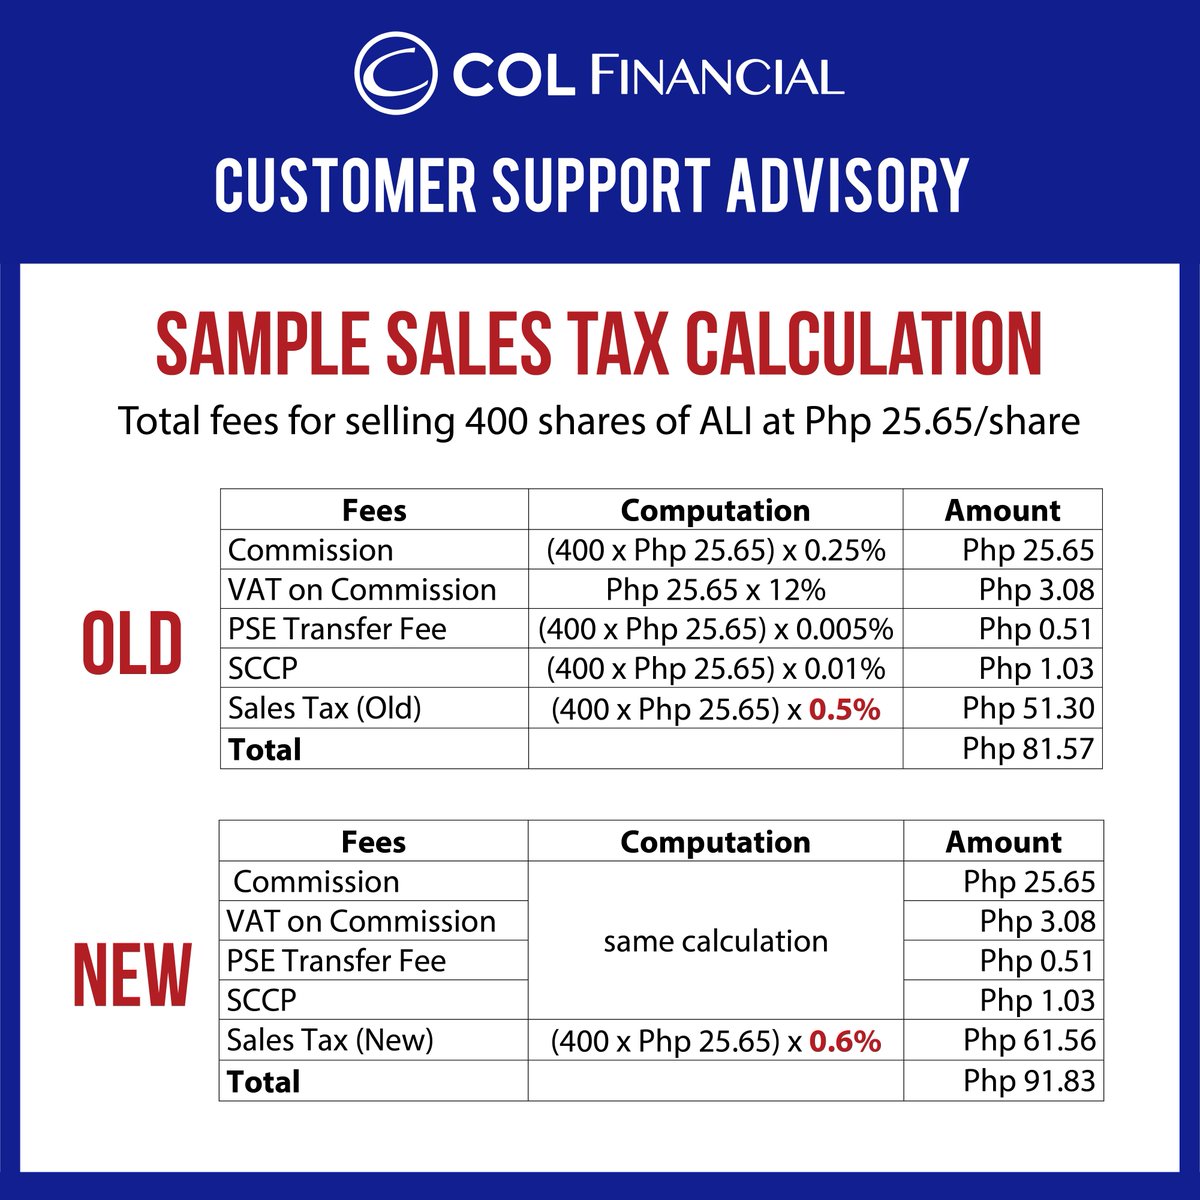 Col Financial On Twitter Advisory Increase In Sales Tax For